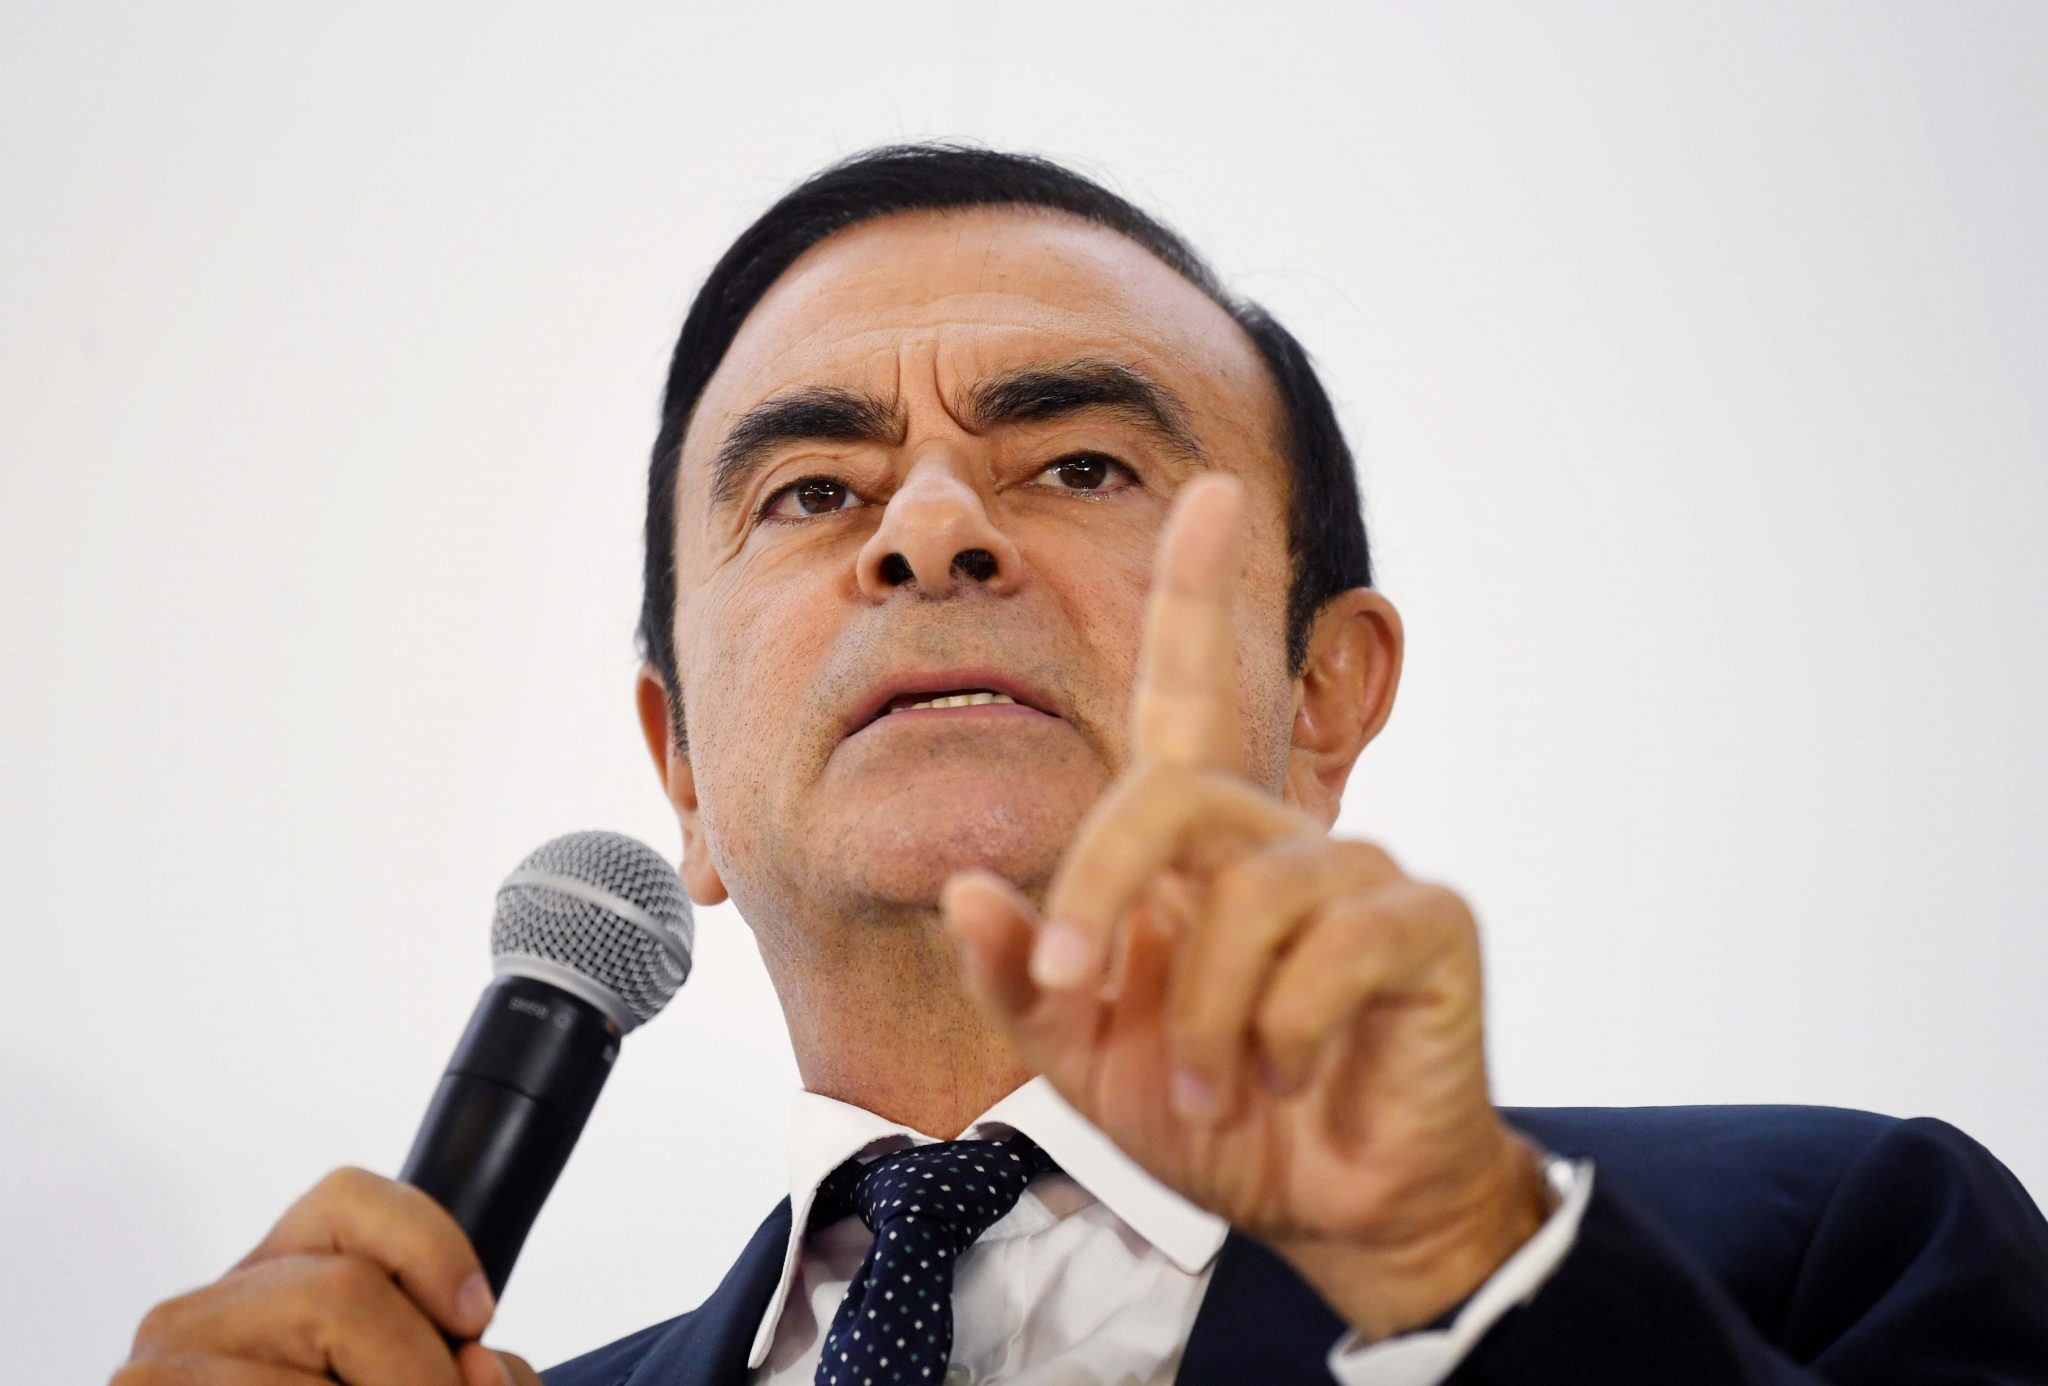 Ex-Nissan boss Carlos Ghosn launches business program to revive Lebanon’s struggling economy